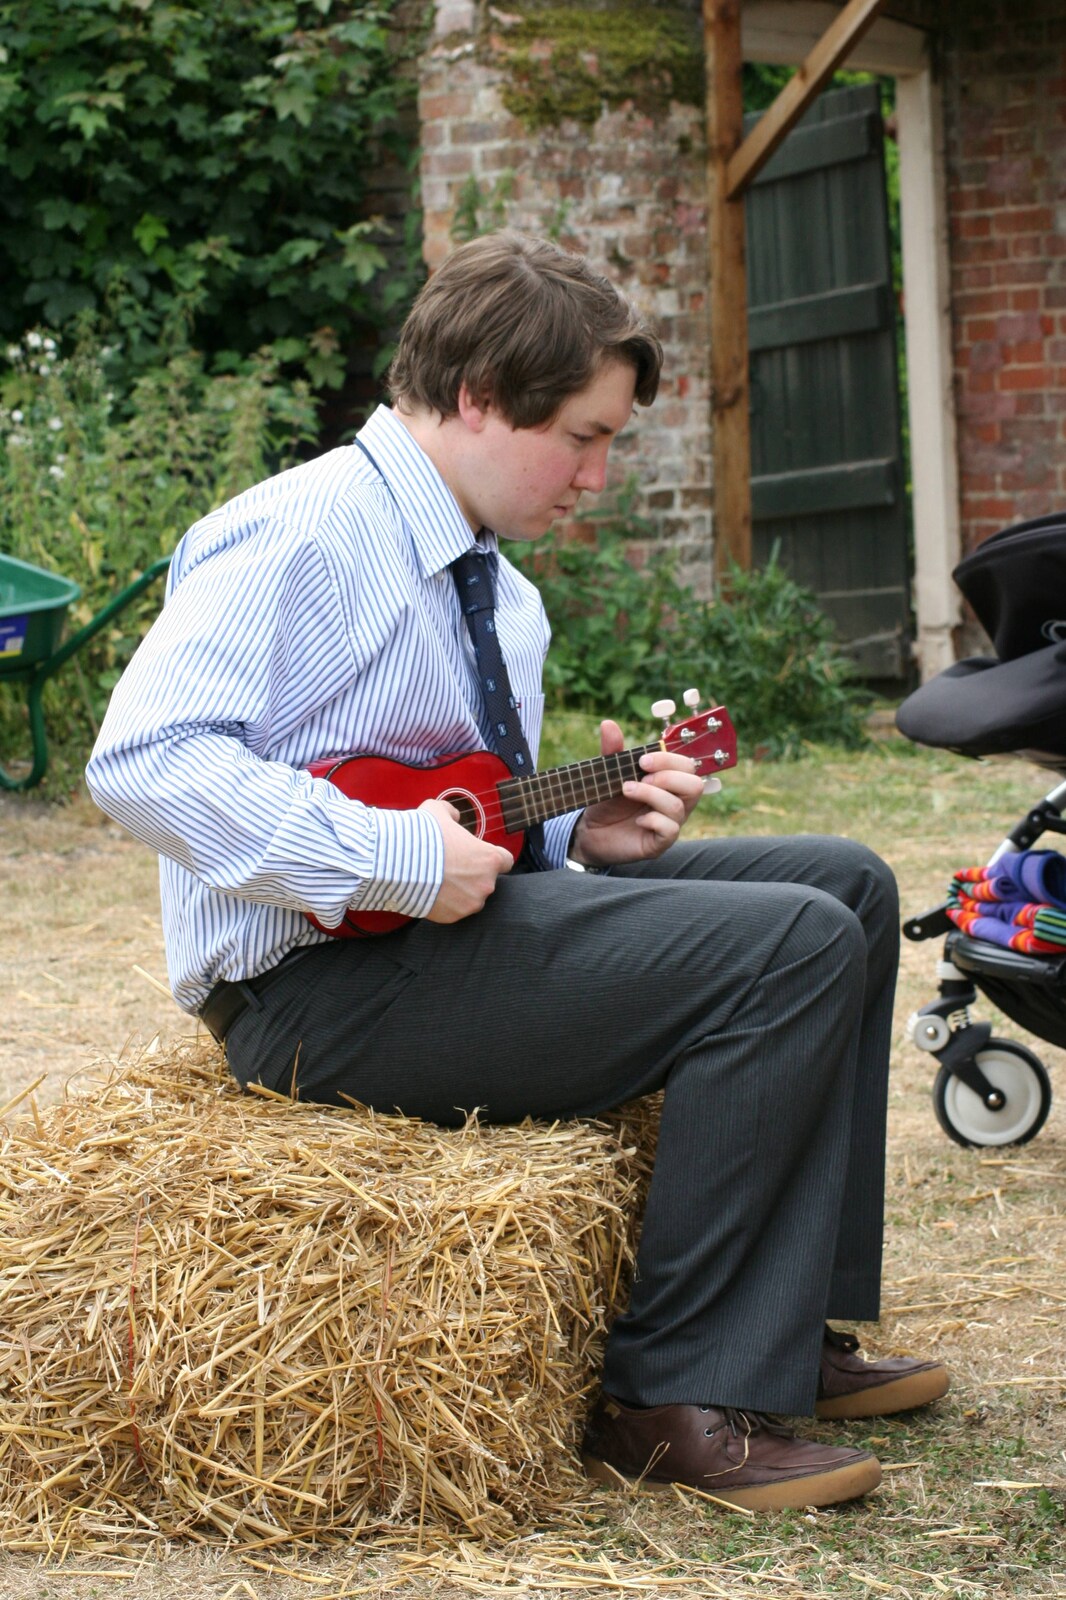 Eoghan plays ukulele from Wedding-Eve Beers at The Swan Inn, Brome, Suffolk - 2nd July 2010